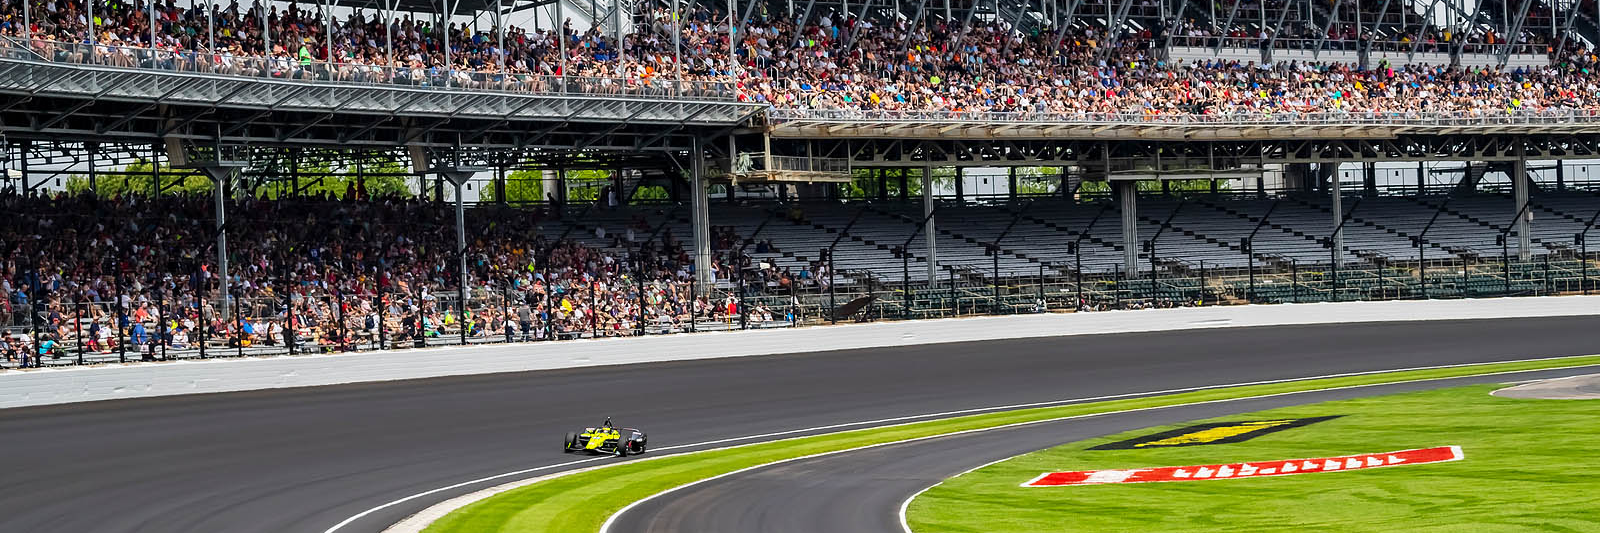 Stock photo from Indianapolis Motor Speedway with fans in the stands and one racecar, purchased from Big Stock